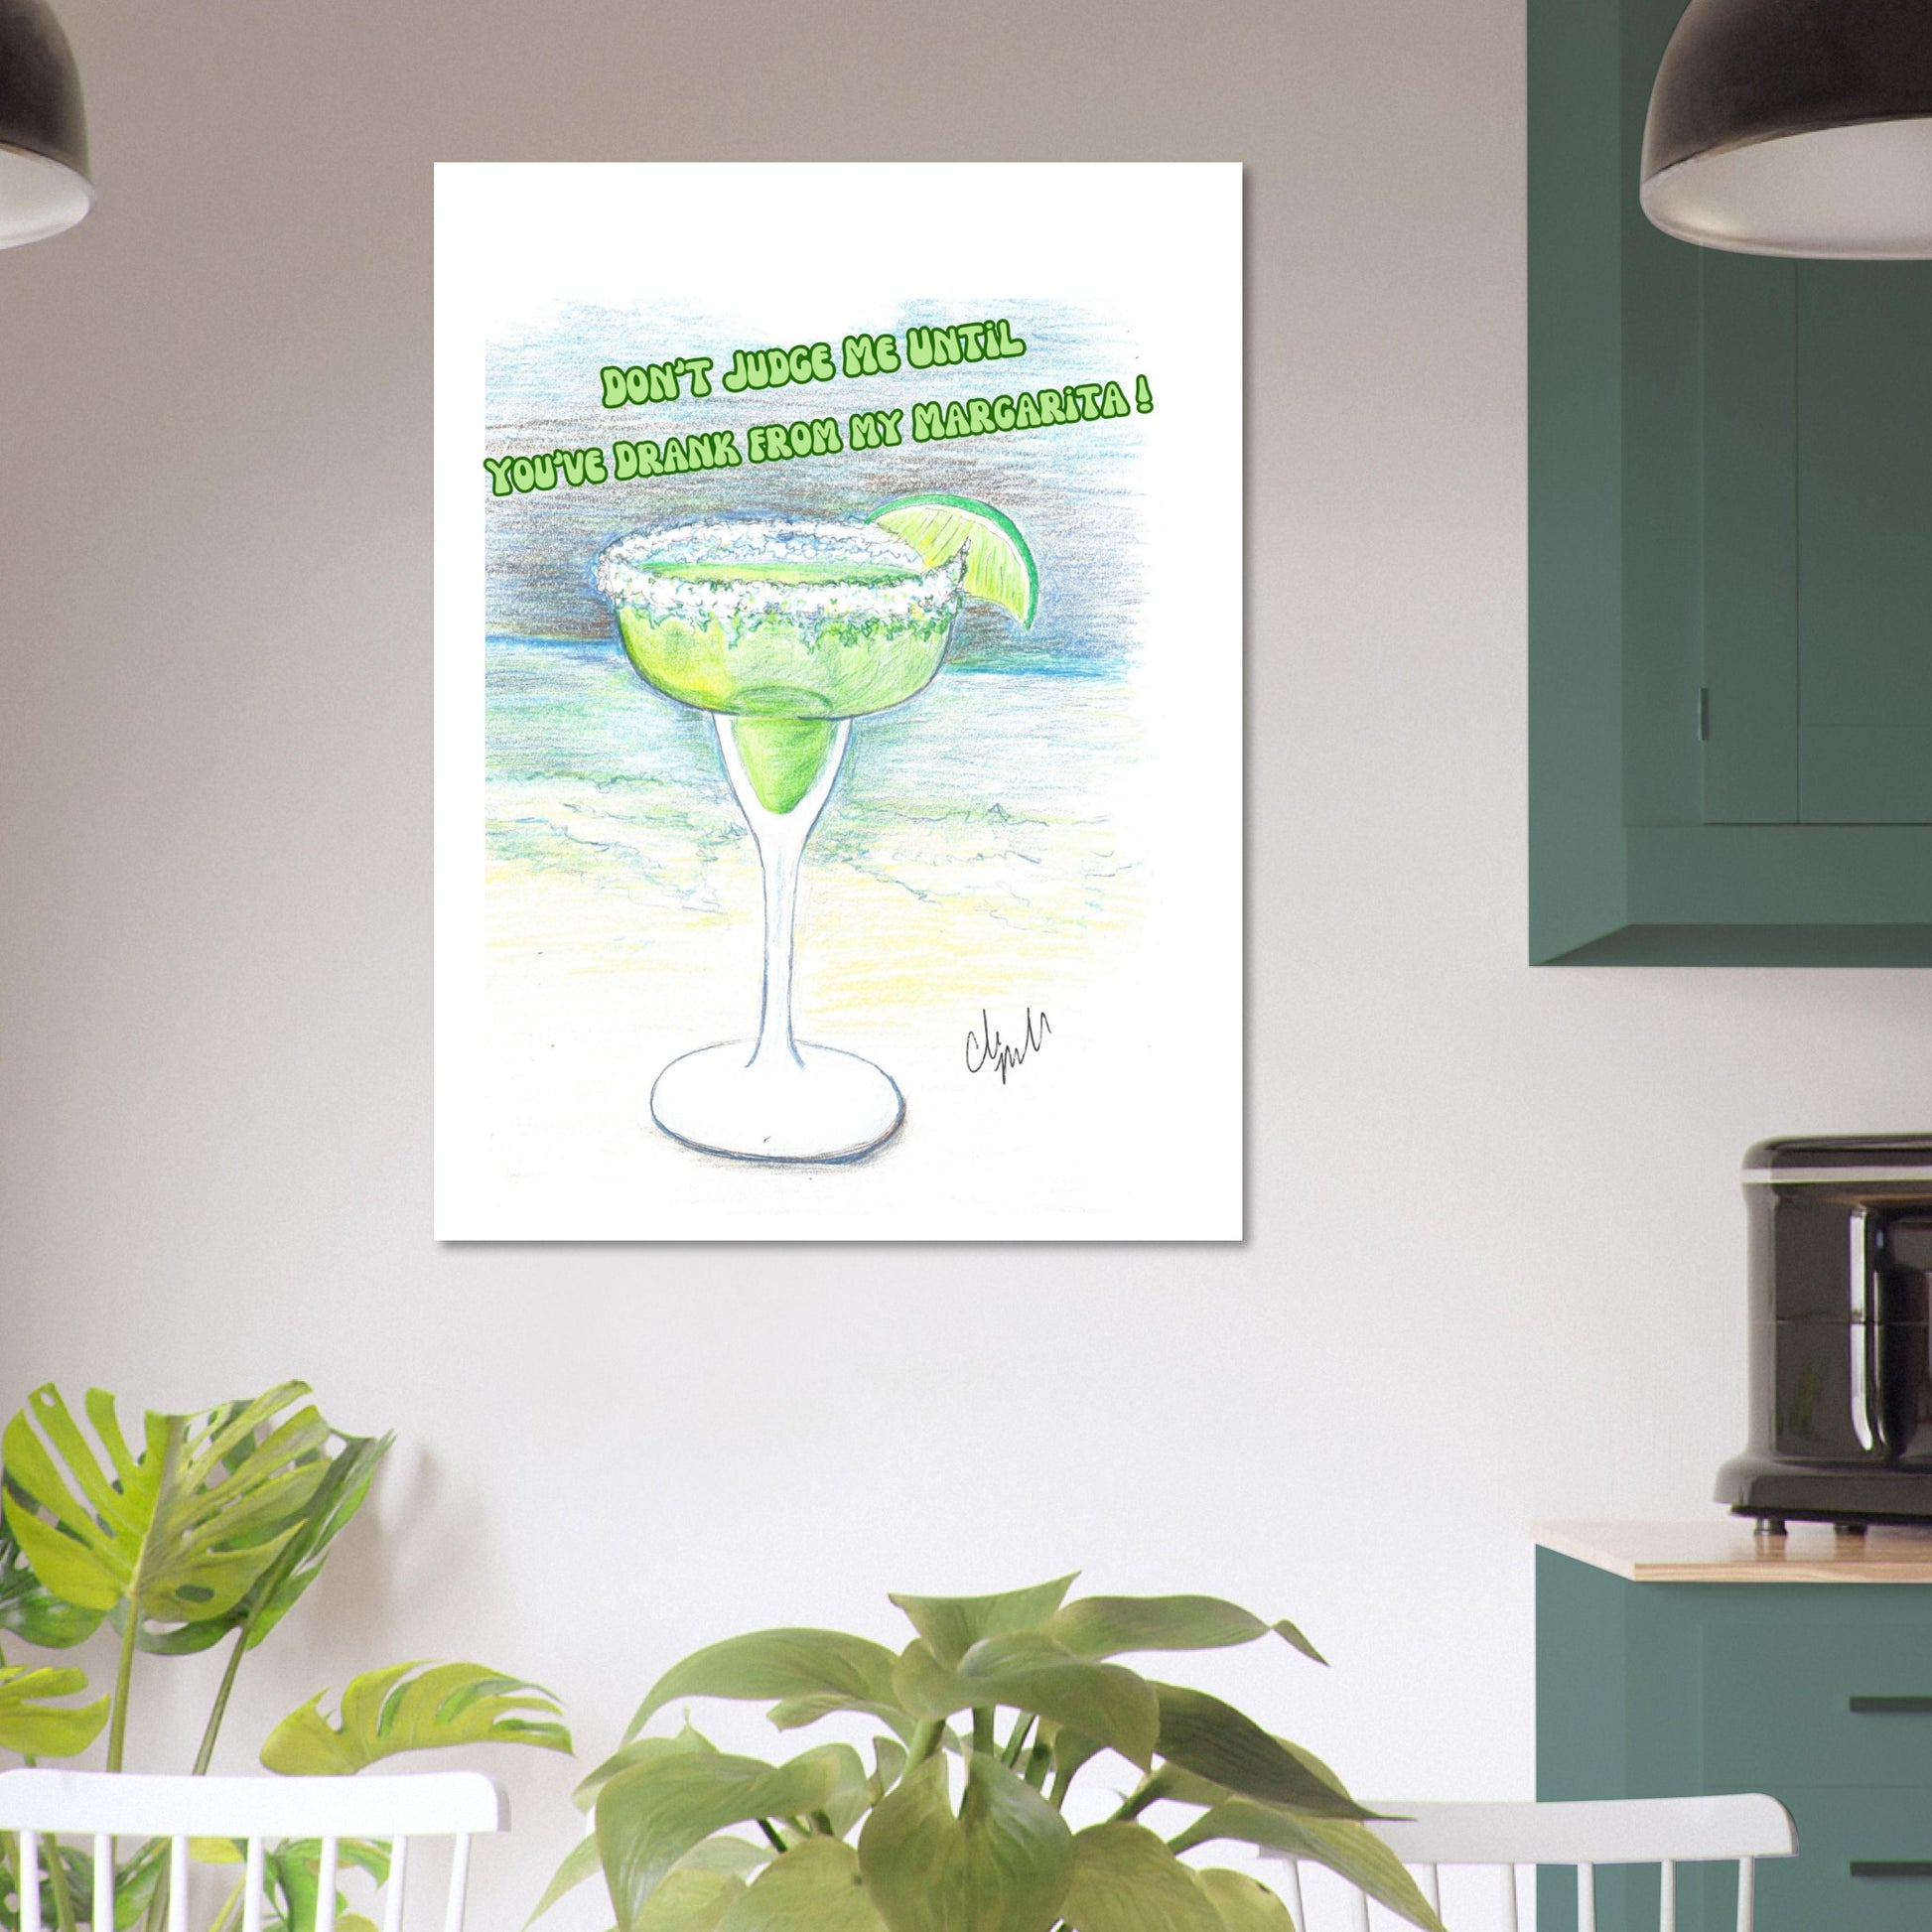 Don't Judge Me Until You've Drank From My Margarita Premium Matt Poster on 80 lb paper hanging on wall in ash accent breakfast area.